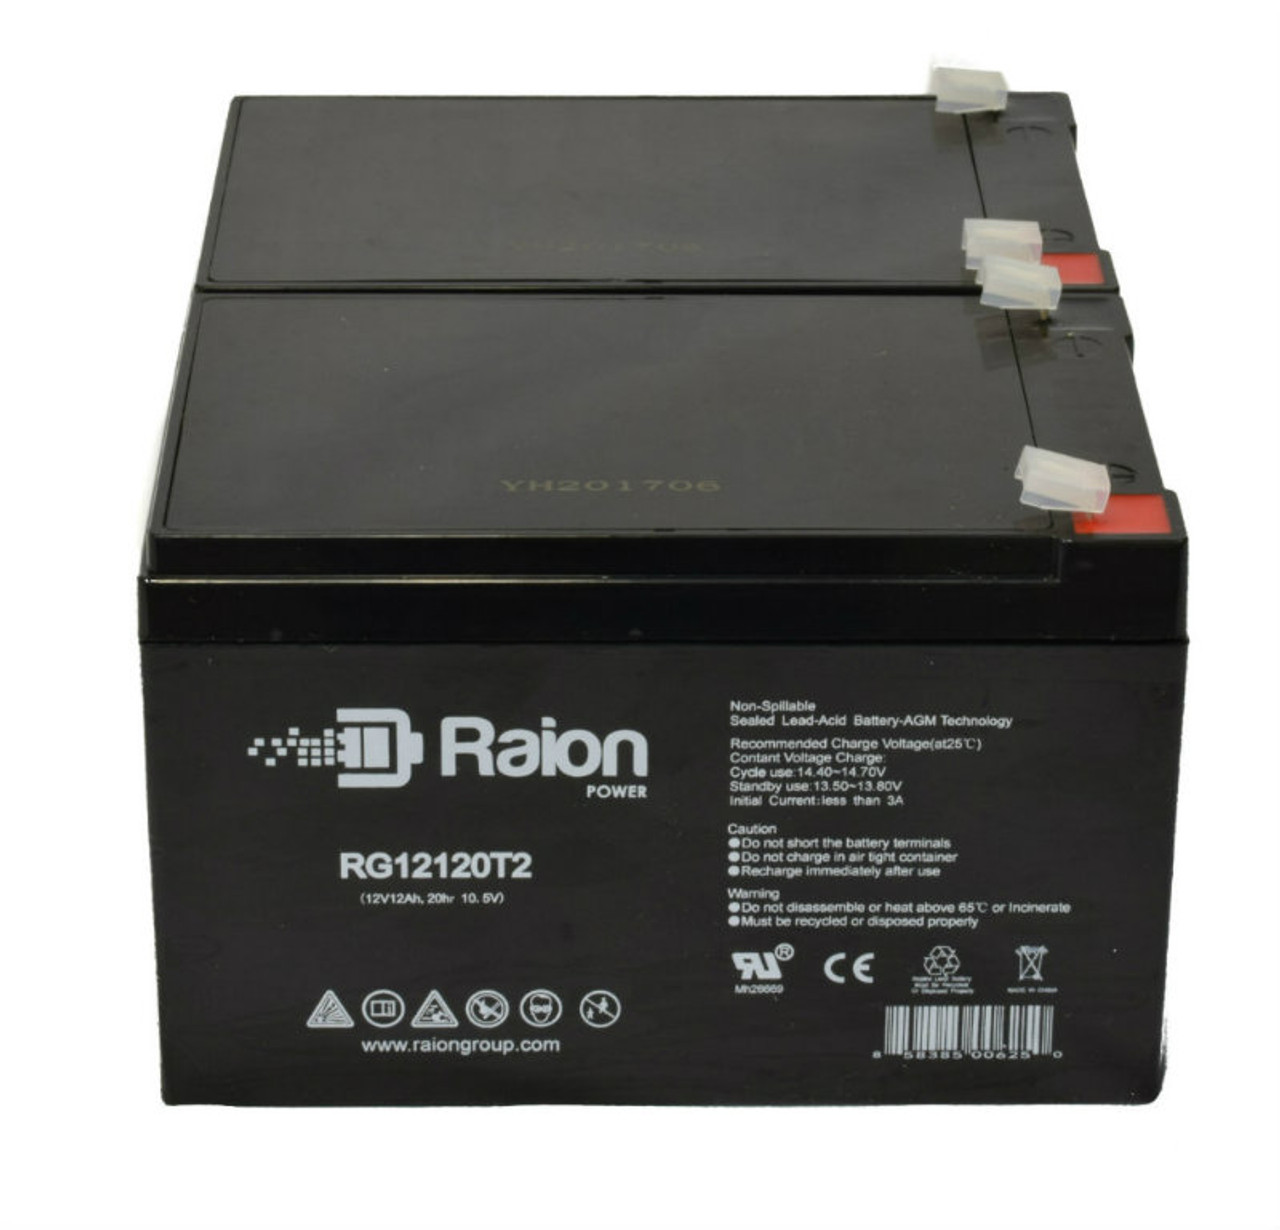 Raion Power RG12120T2 12V 12Ah Replacement UPS Battery for CyberPower 1000VA PR1000LCD - 2 Pack